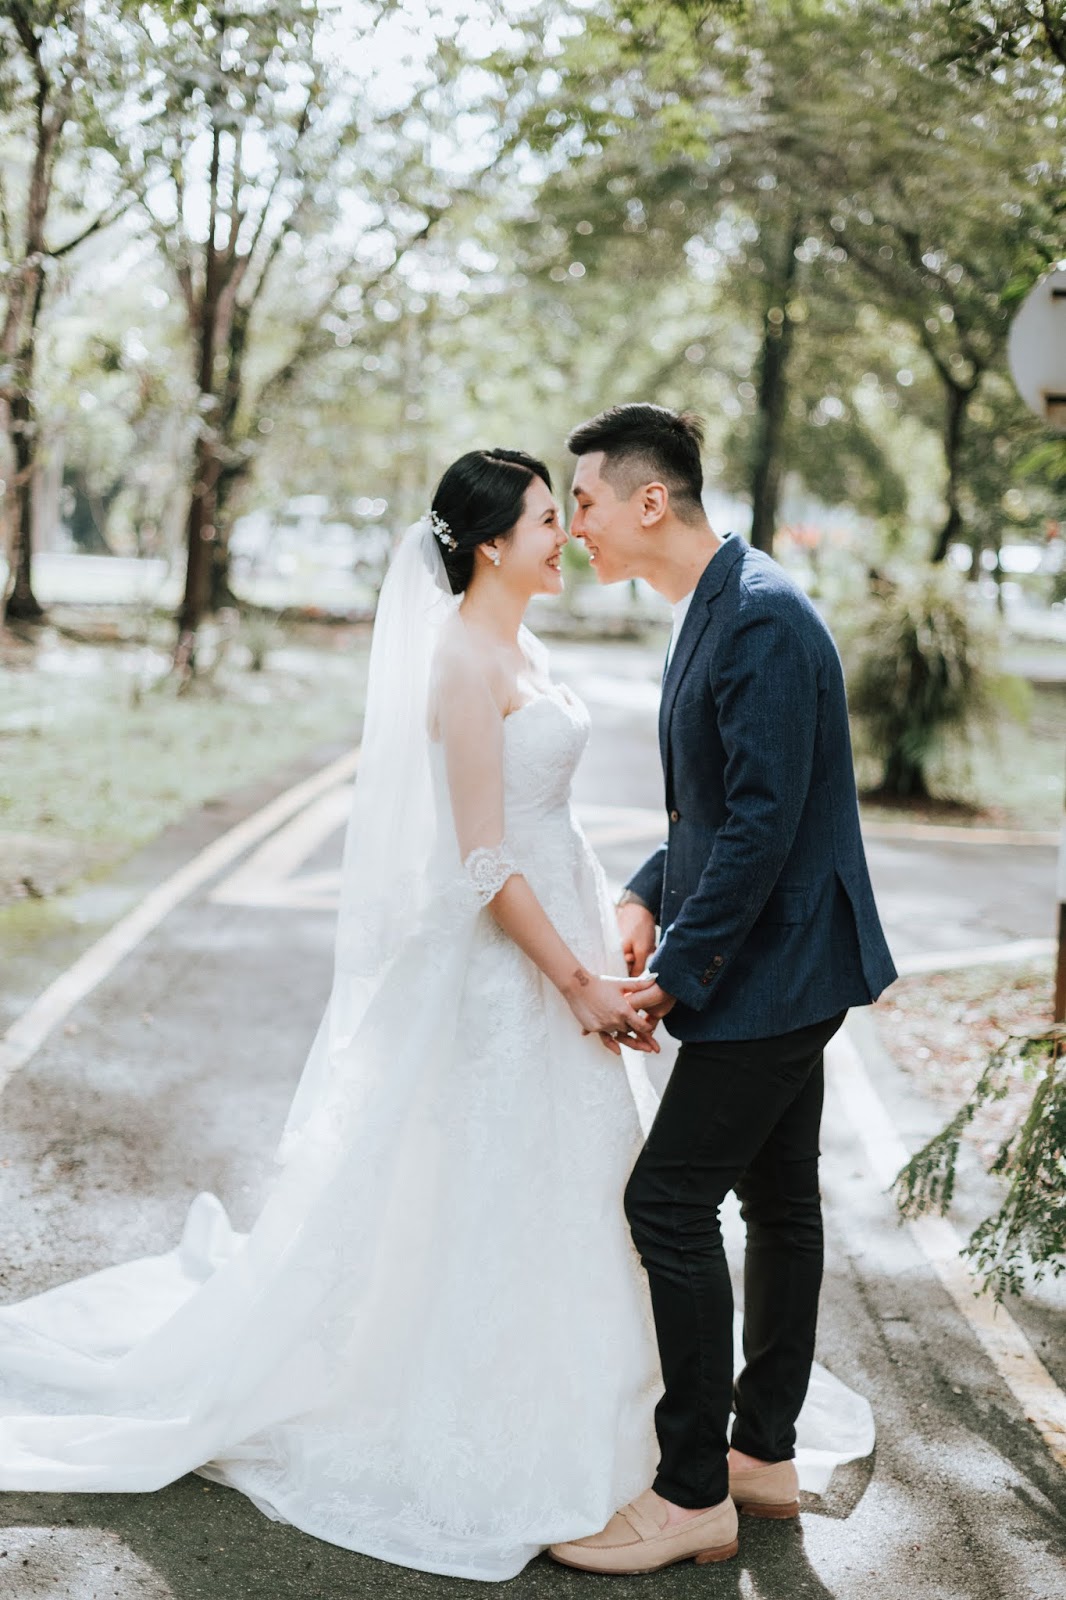 Kee Hua Chee Live Qx Lee Weds Eling In The Wedding Of -8129